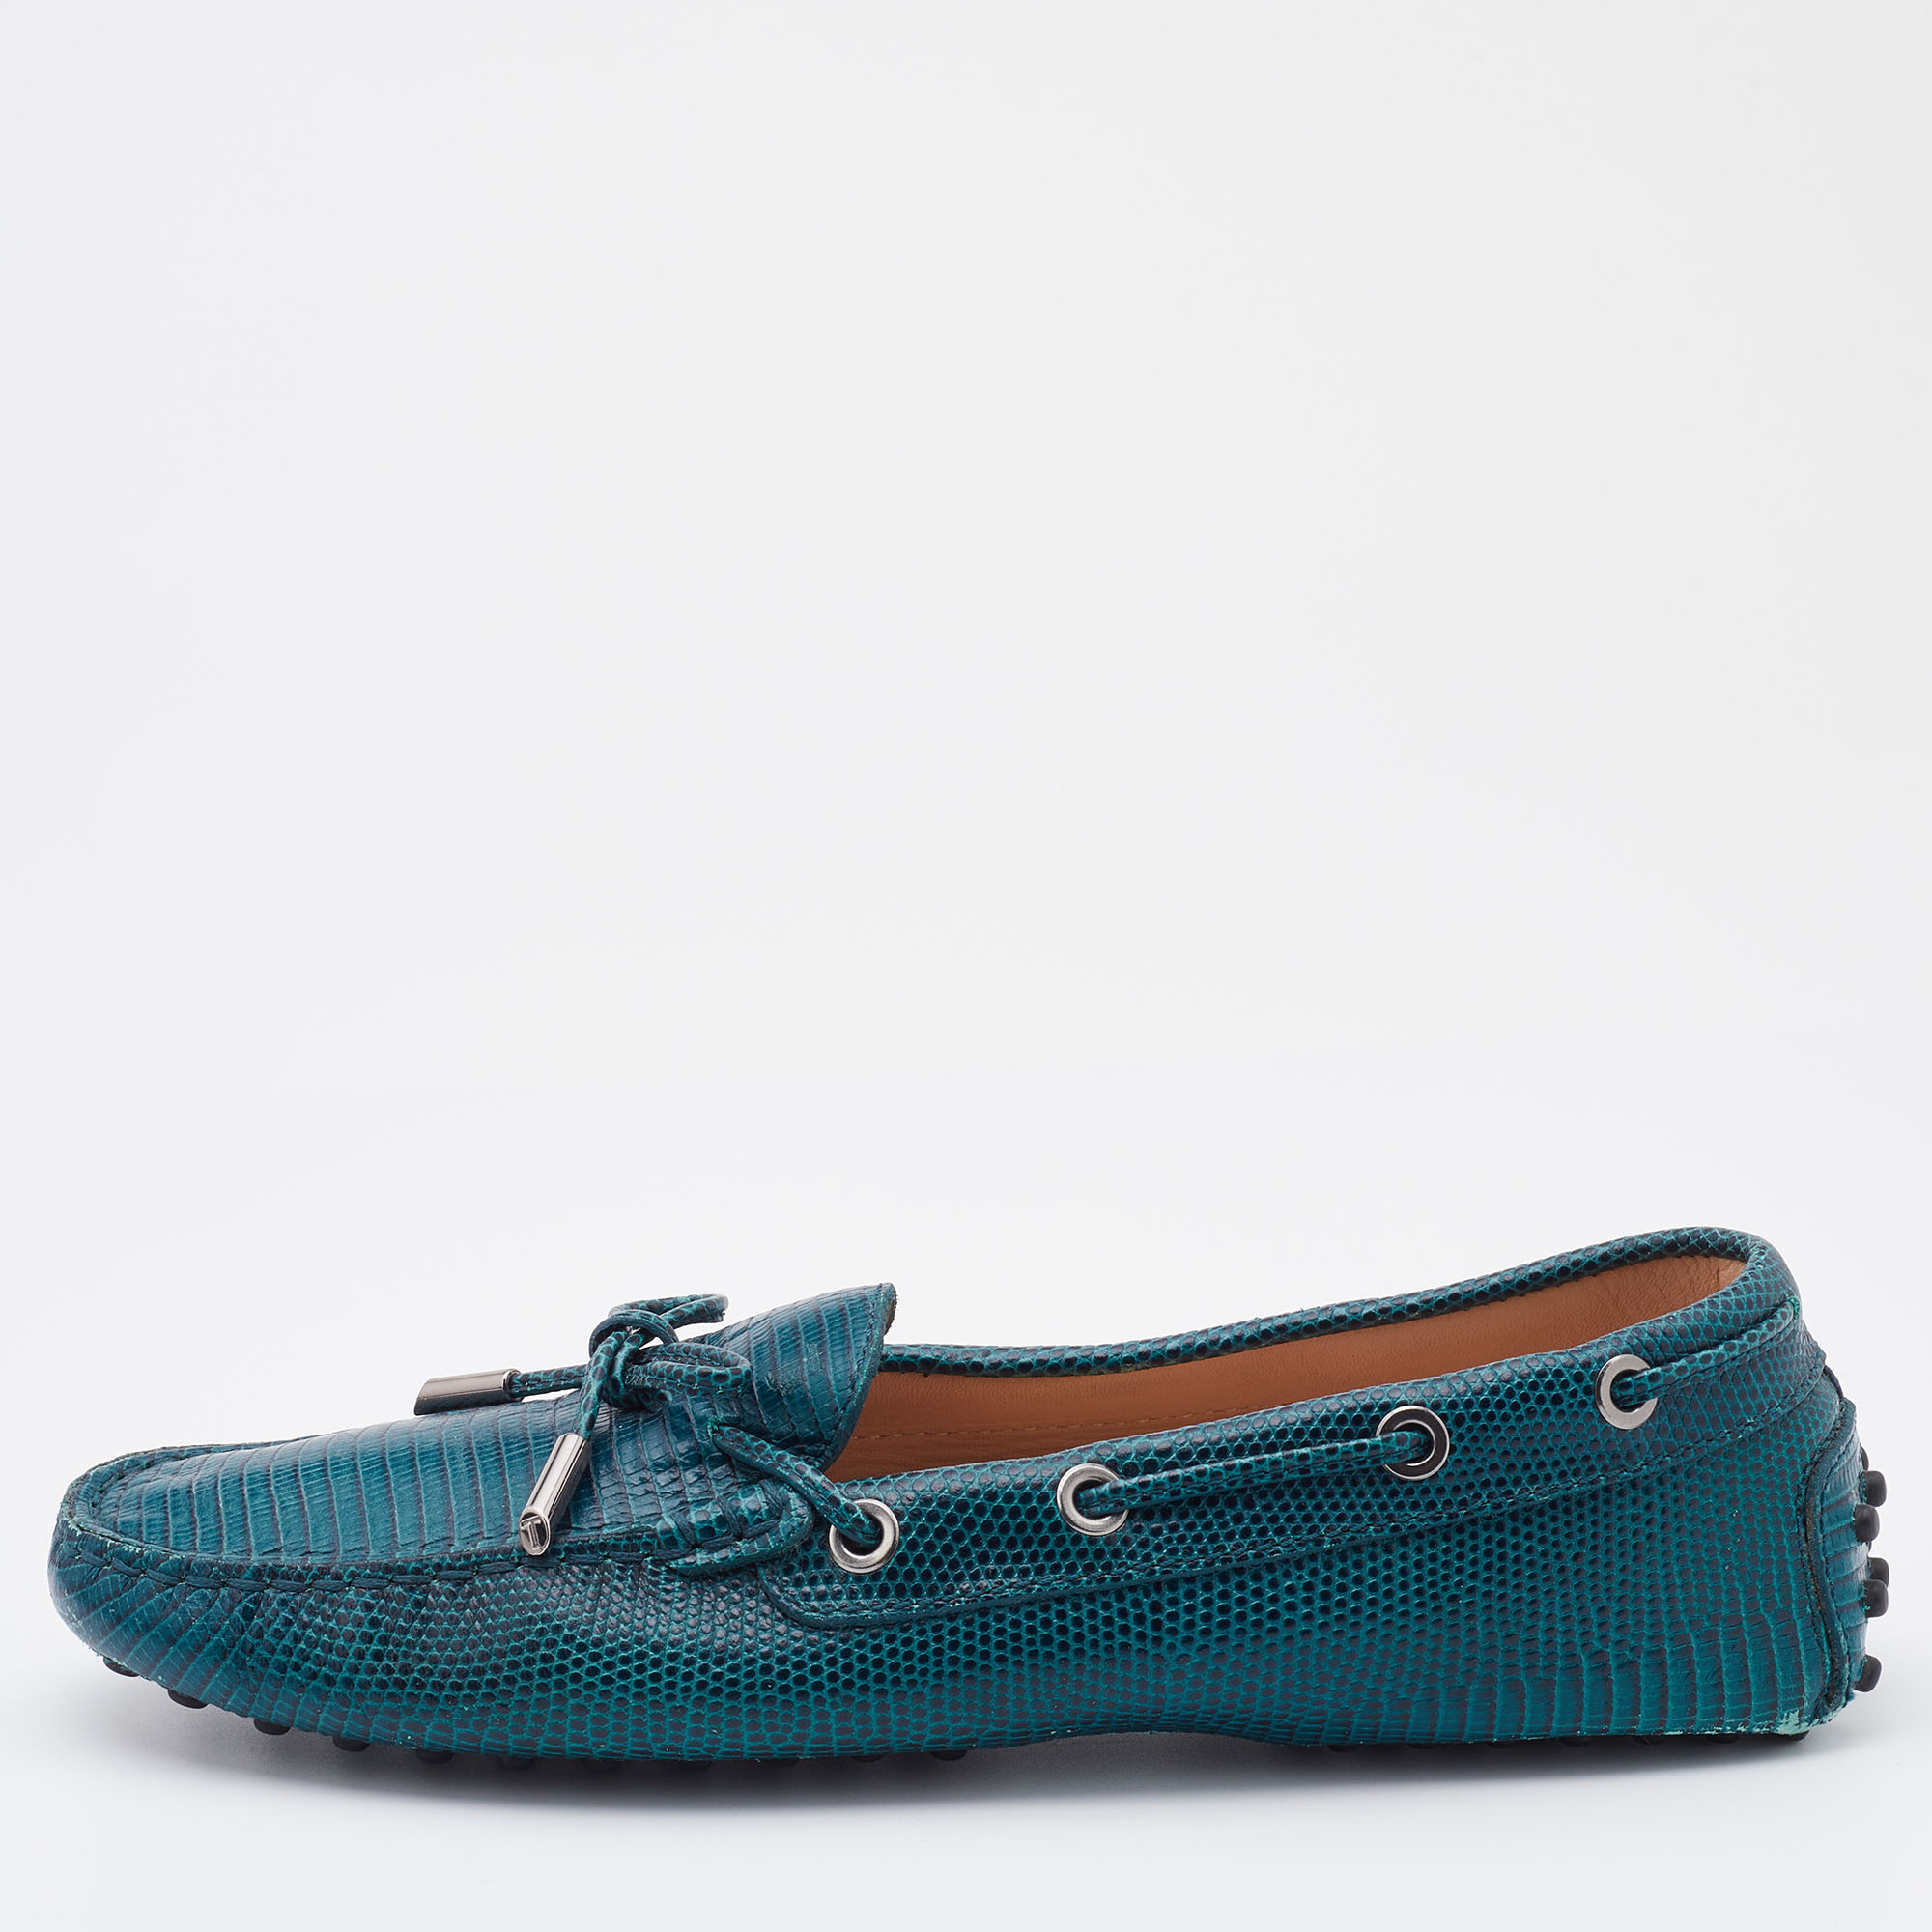 Tod's teal blue lizard embossed leather bow slip on loafers size 37.5